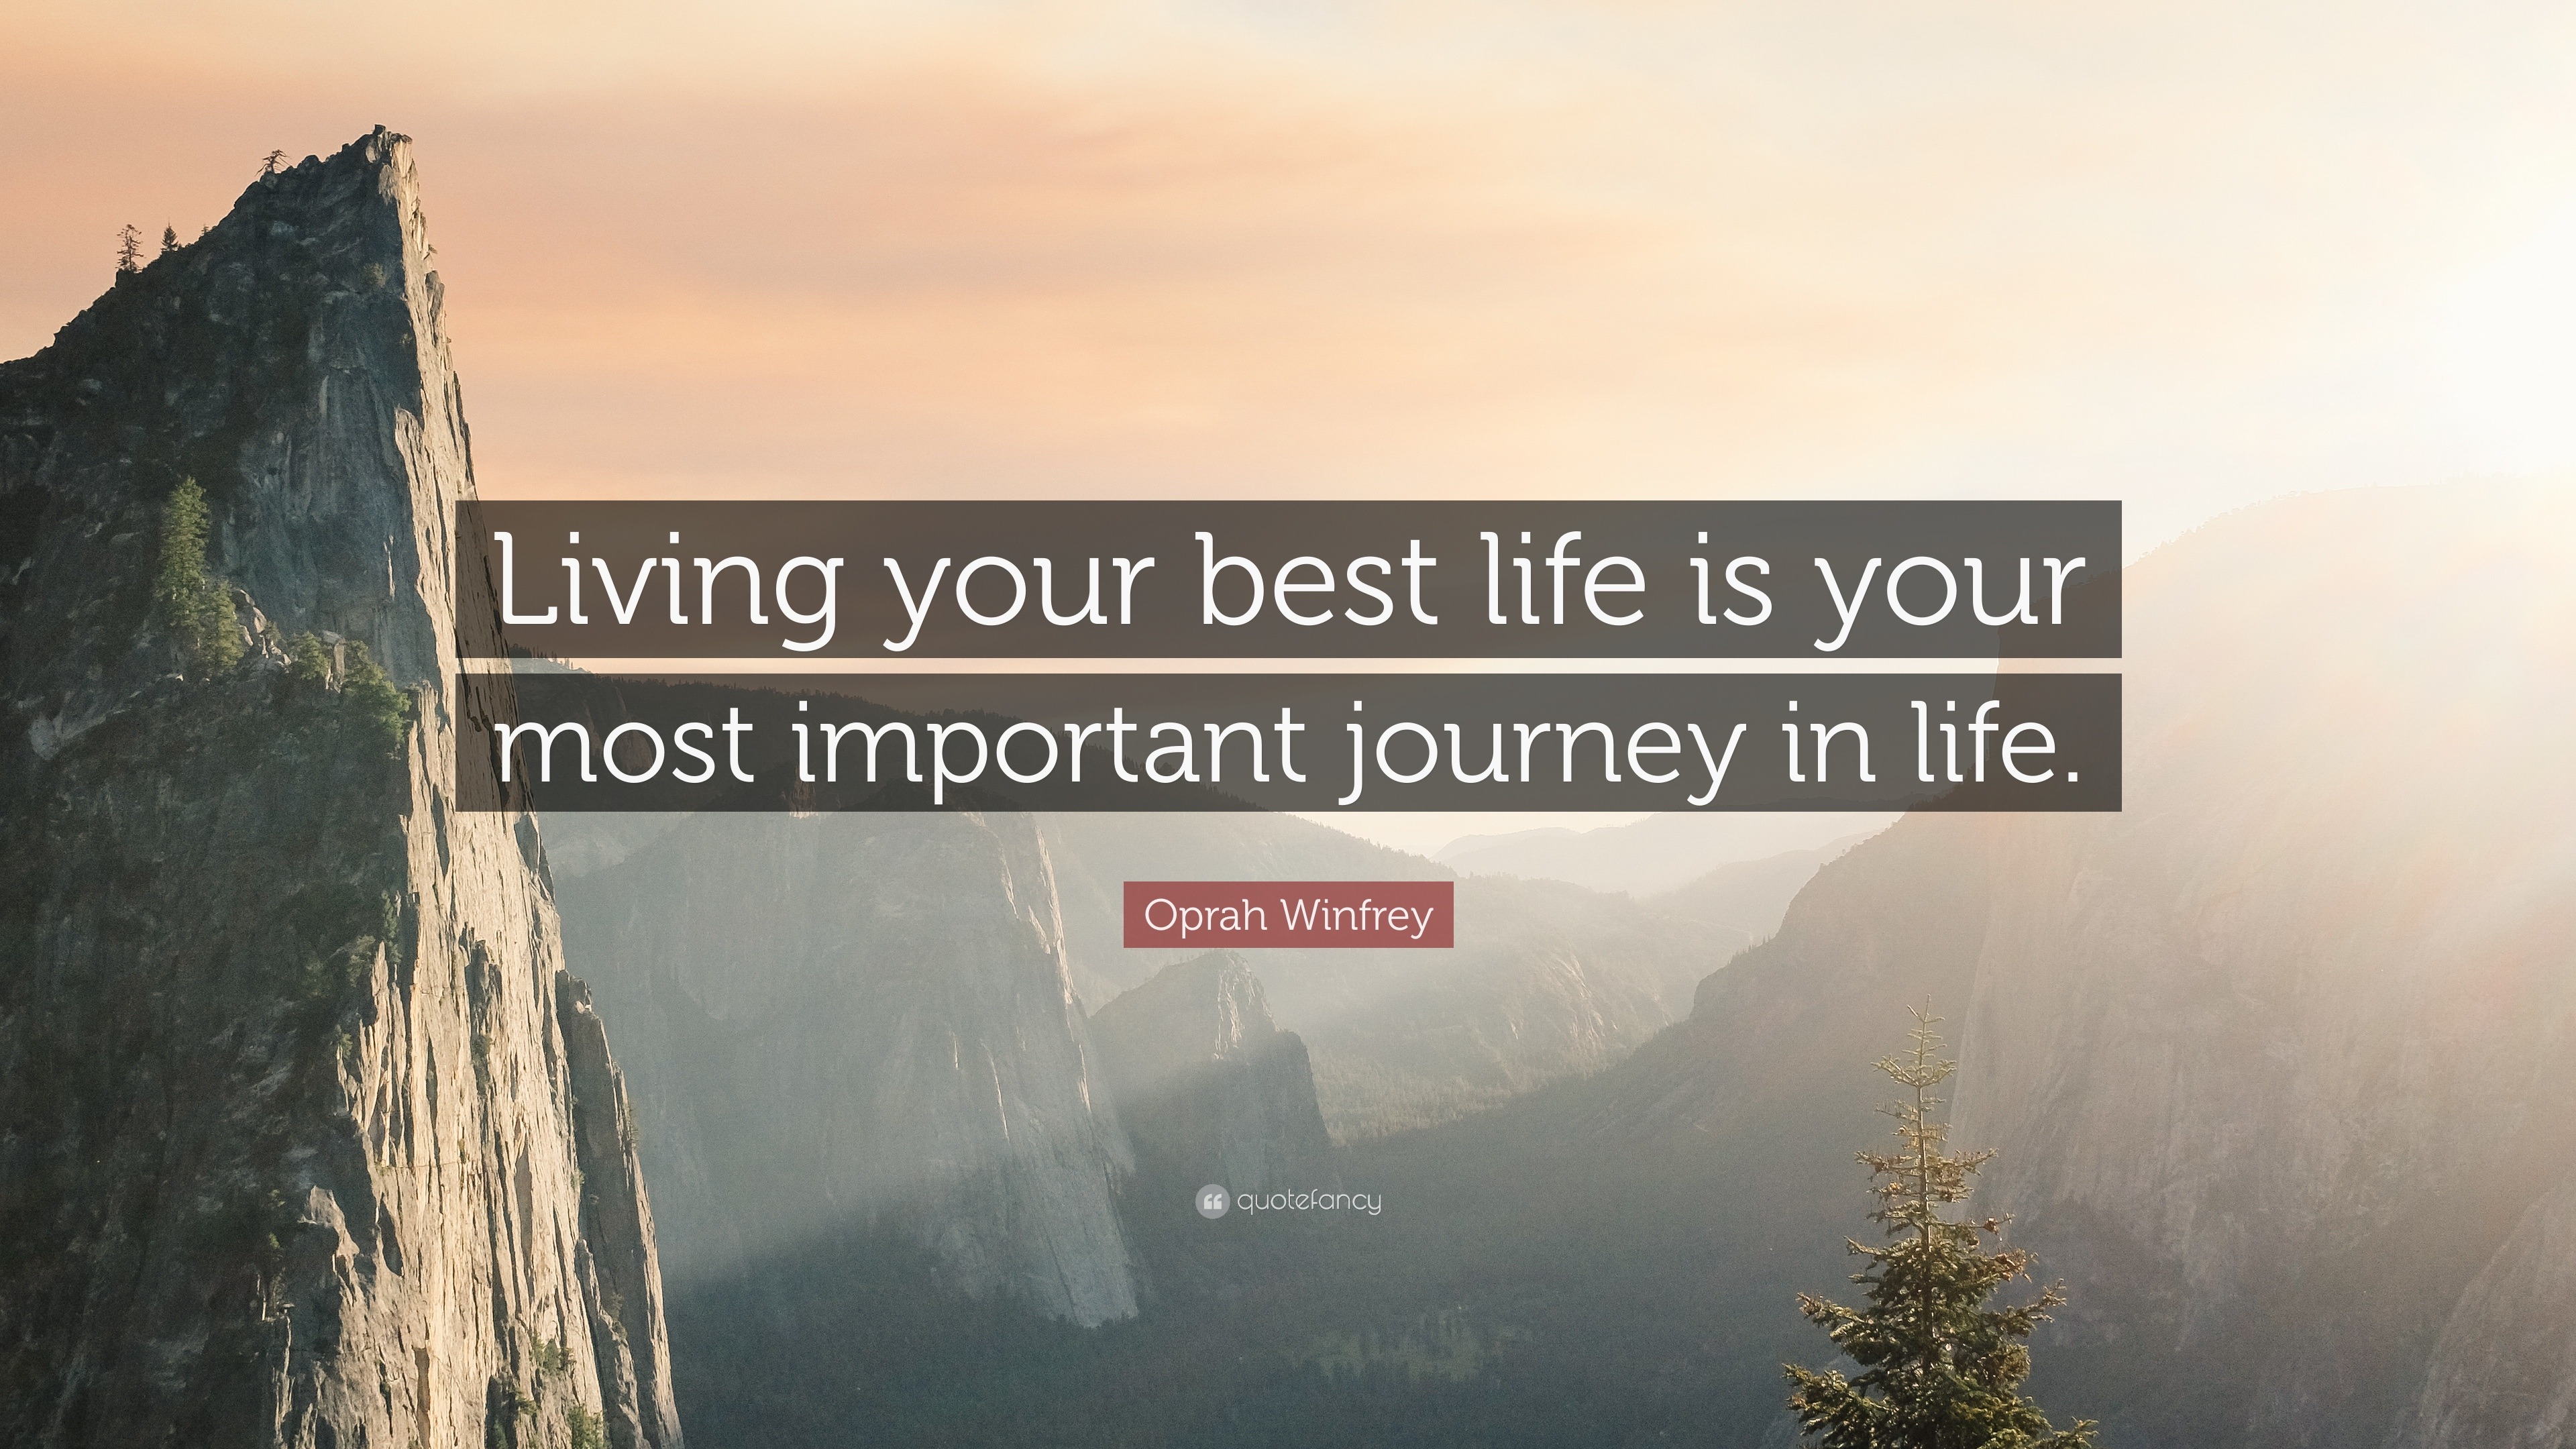 Oprah Winfrey Quote “Living your best life is your most